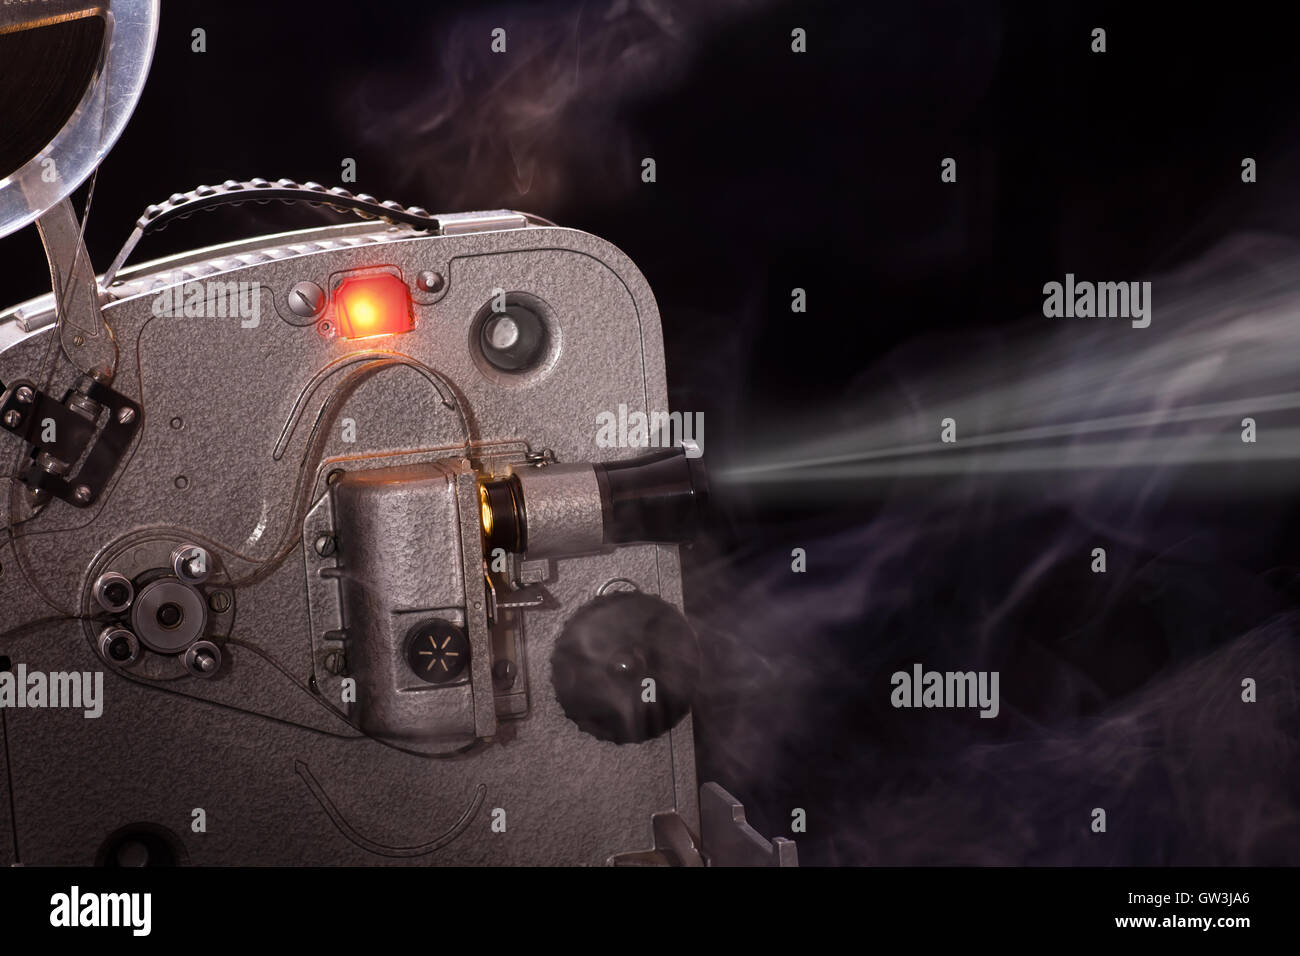 Old amateur movie projector Stock Photo